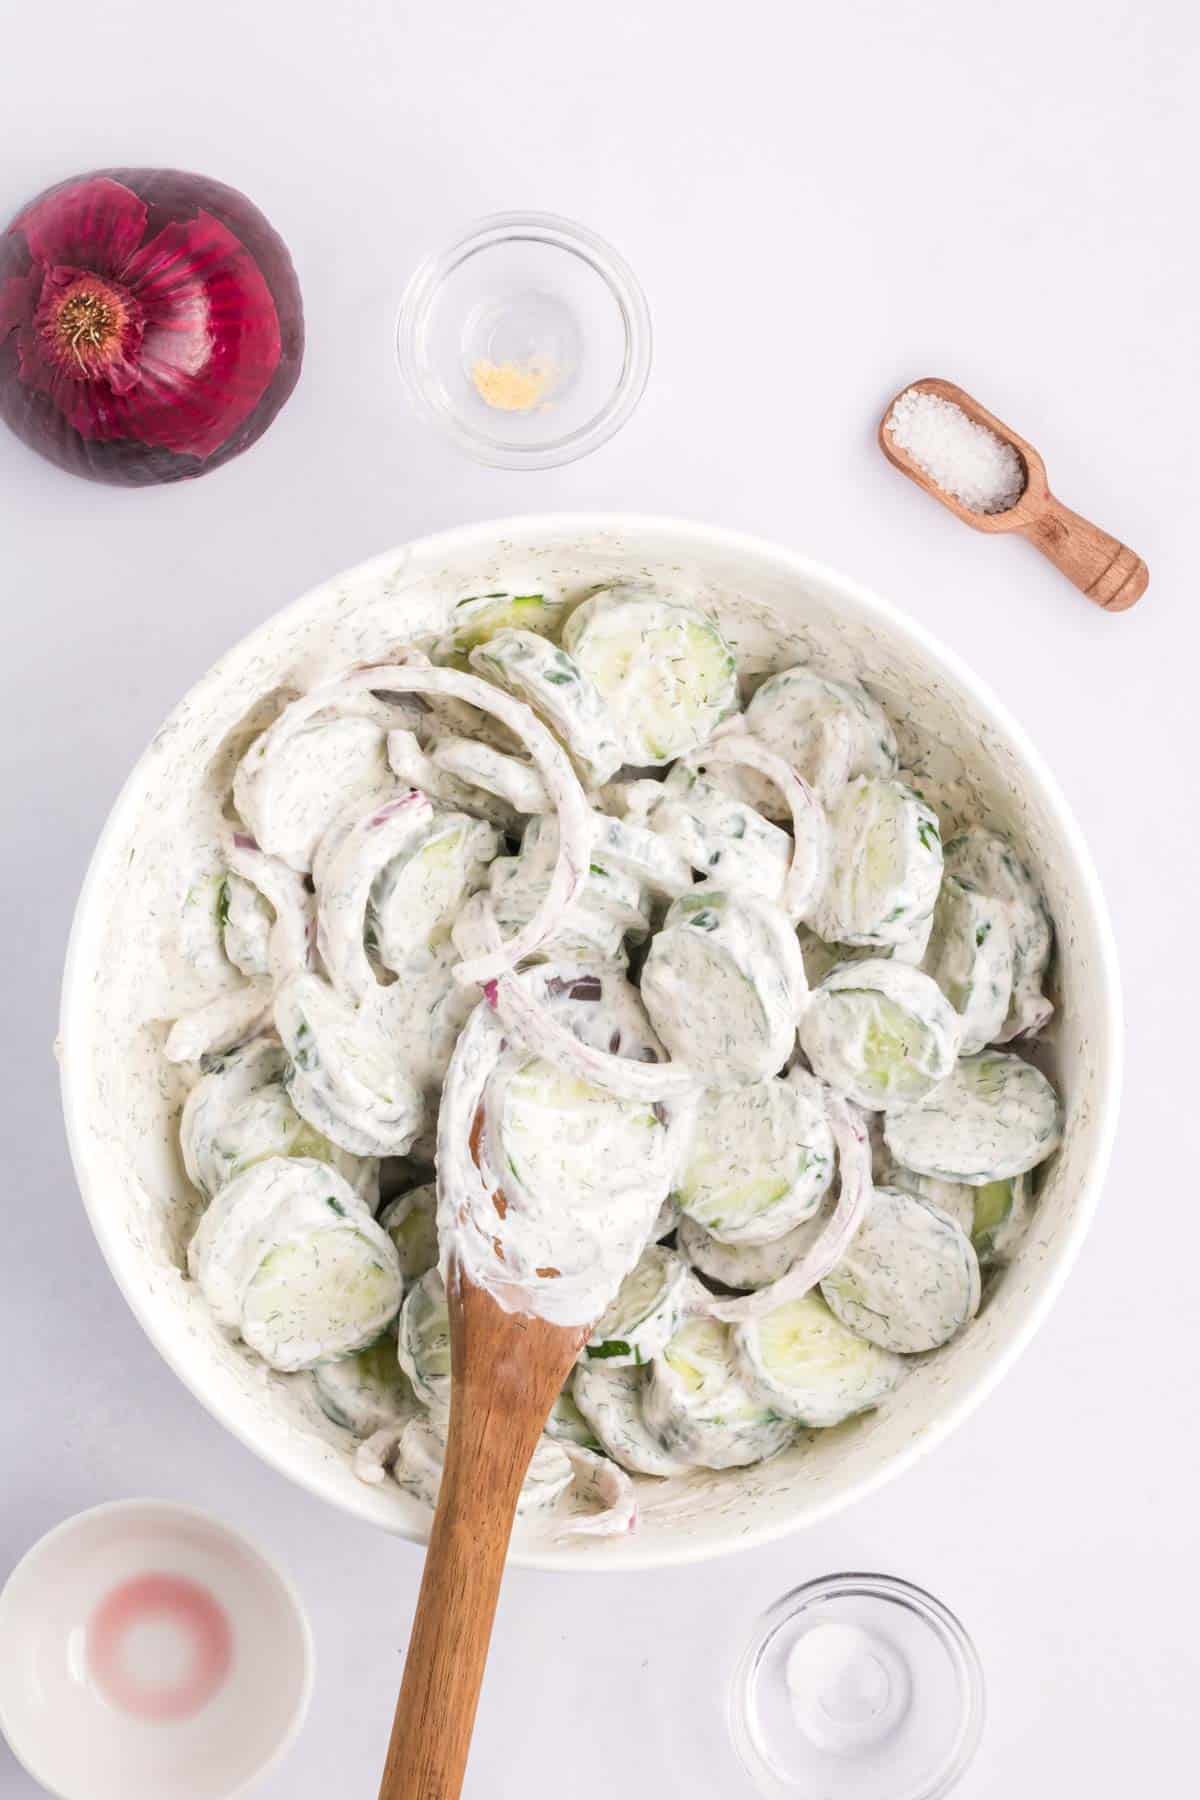 Last step when making creamy cucumber salad with mayo is to toss everything in a large bowl.